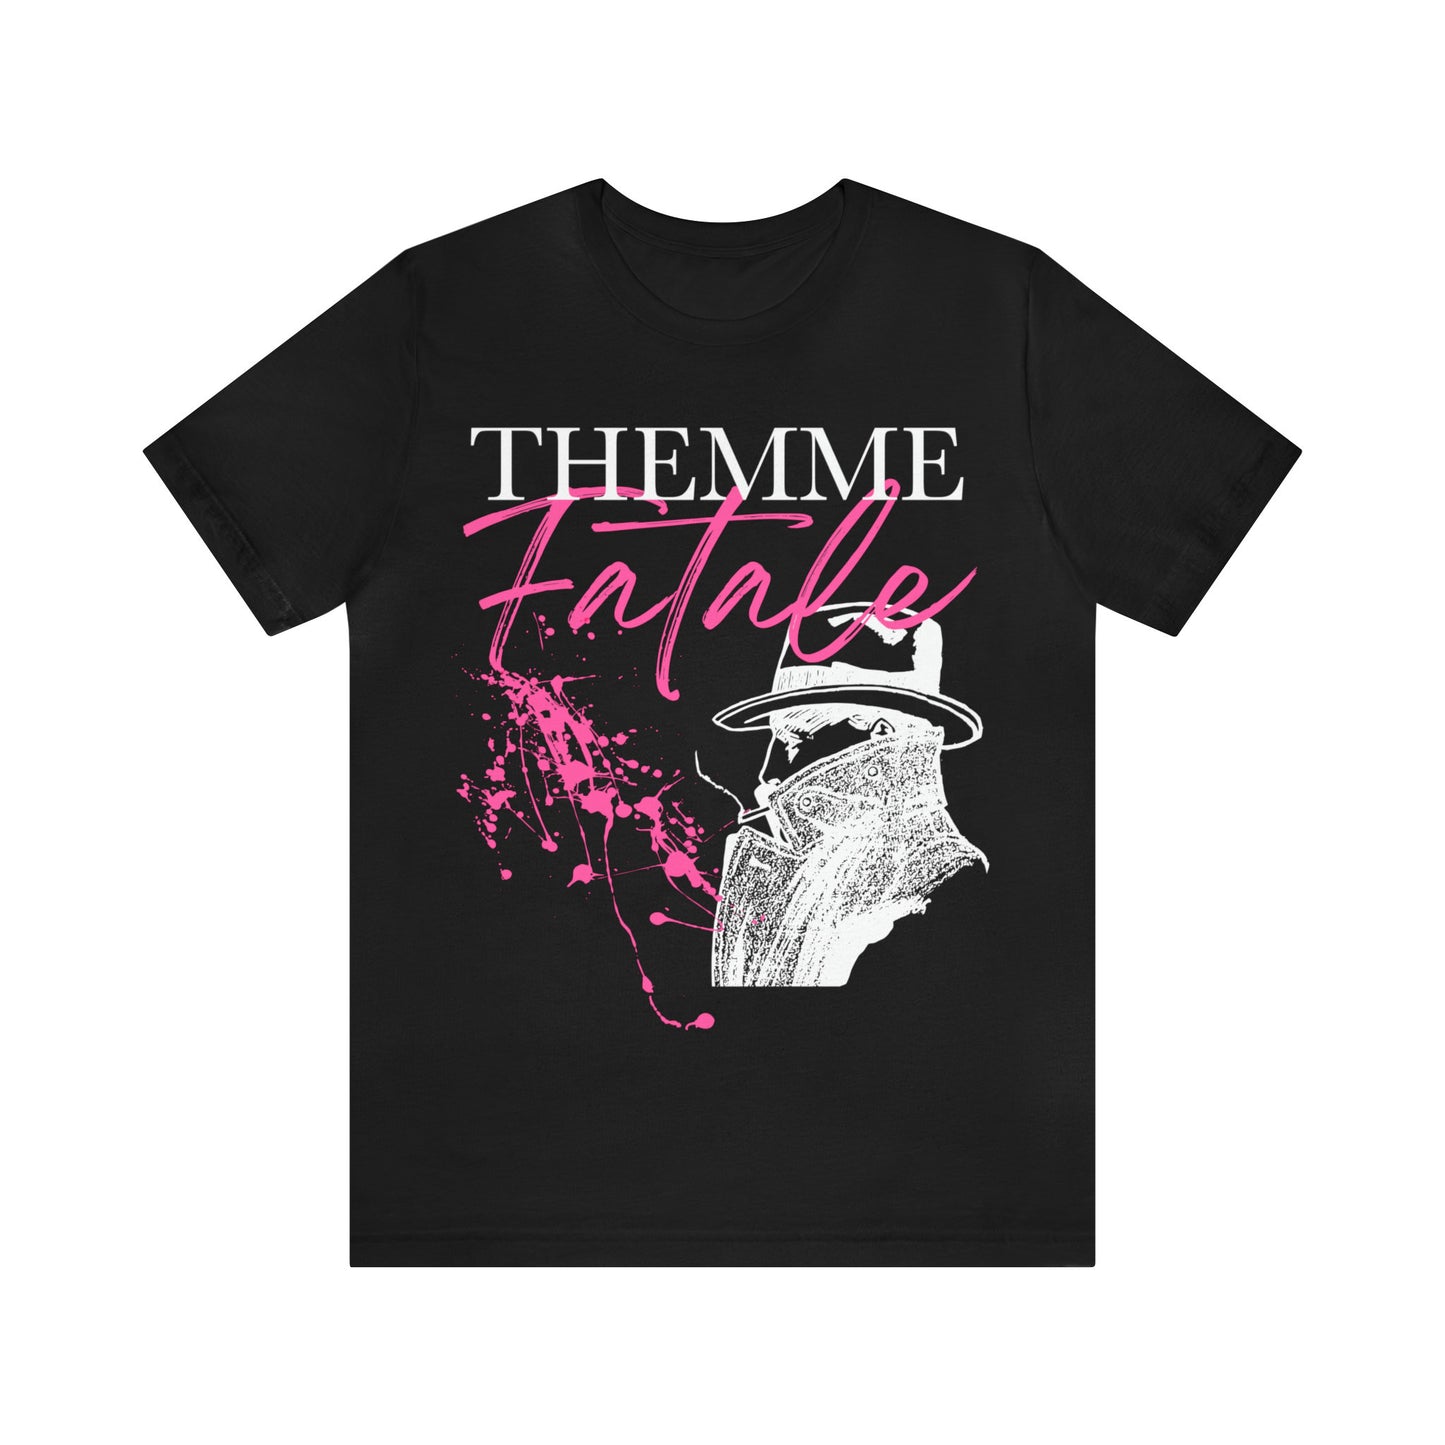 Themme fatale shirt